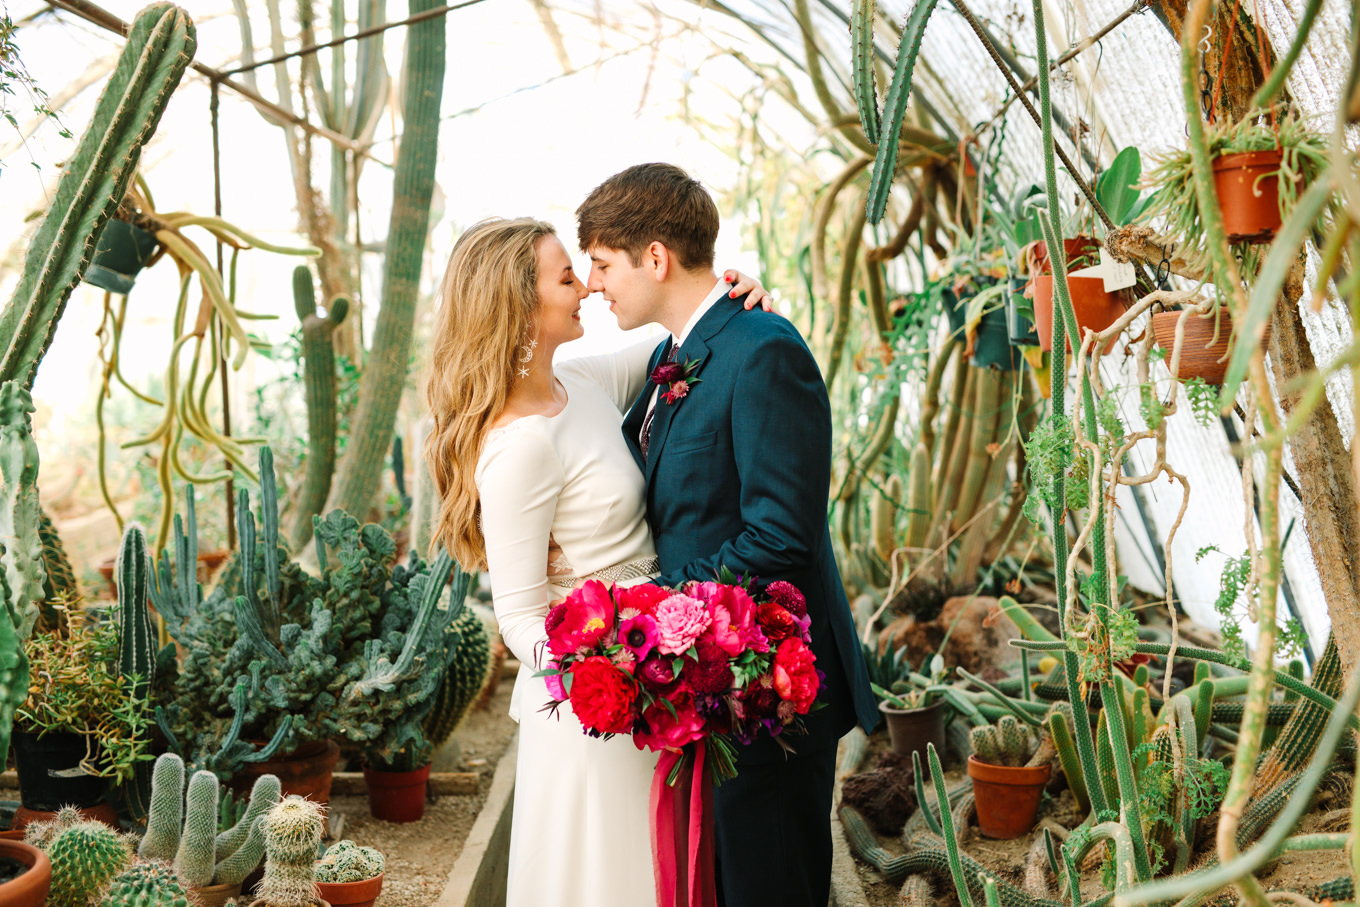 Bride and groom in cactus garden at Moorten Botanical Garden | Colorful jewel tone Palm Springs elopement | Fresh and colorful photography for fun-loving couples in Southern California | #colorfulelopement #palmspringselopement #elopementphotography #palmspringswedding Source: Mary Costa Photography | Los Angeles